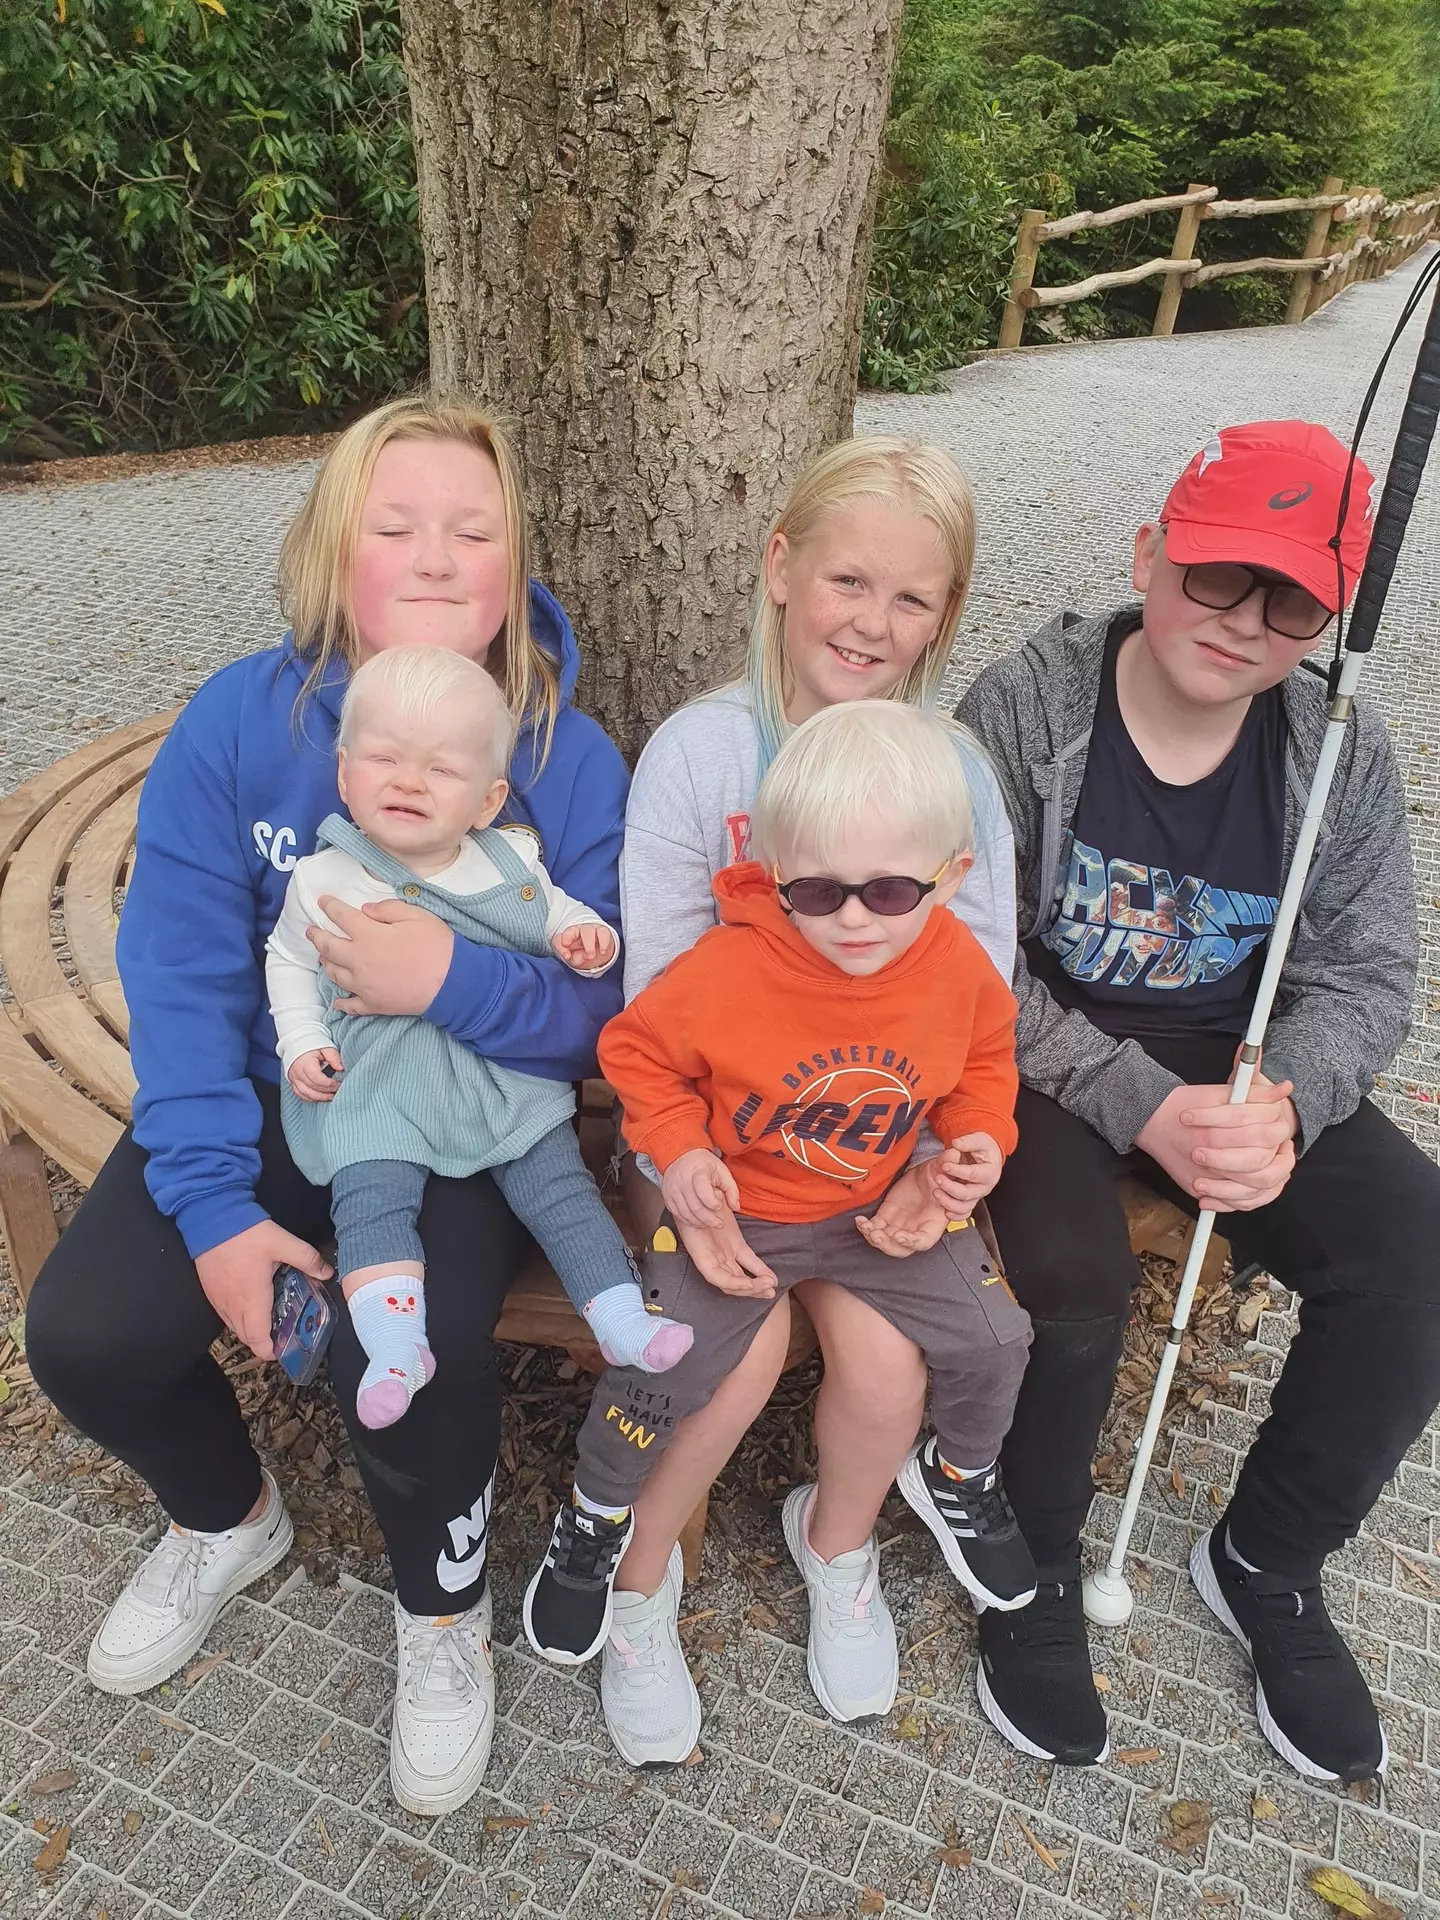 Stacey says that she is 'privileged' to have children with albinism.